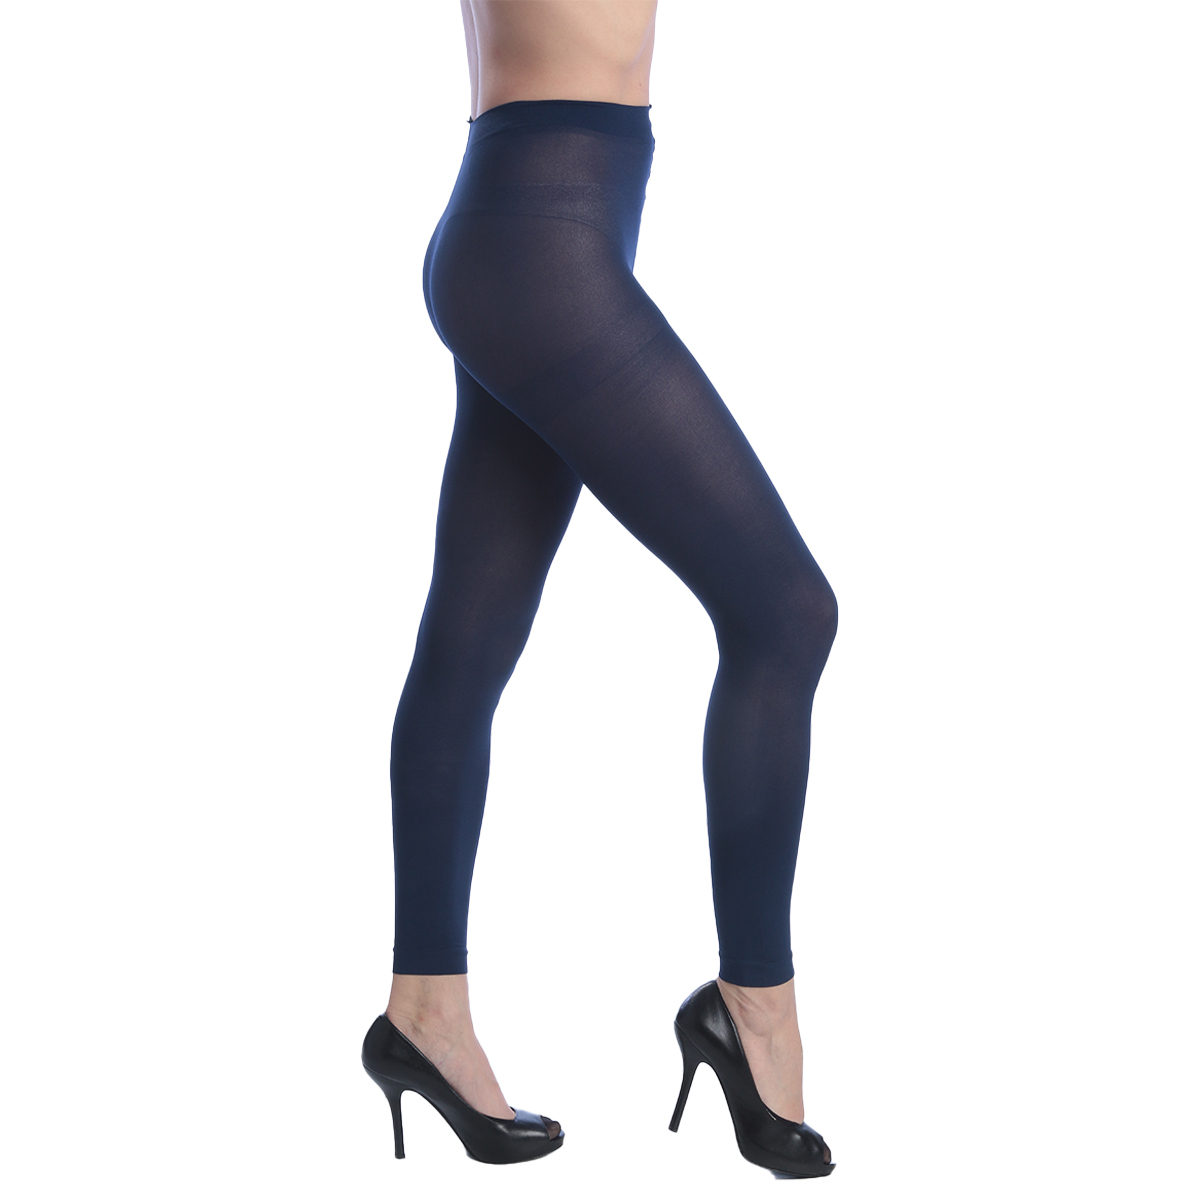 Exceptionally Stylish Wholesale Plus Size Leggings at Low Prices 